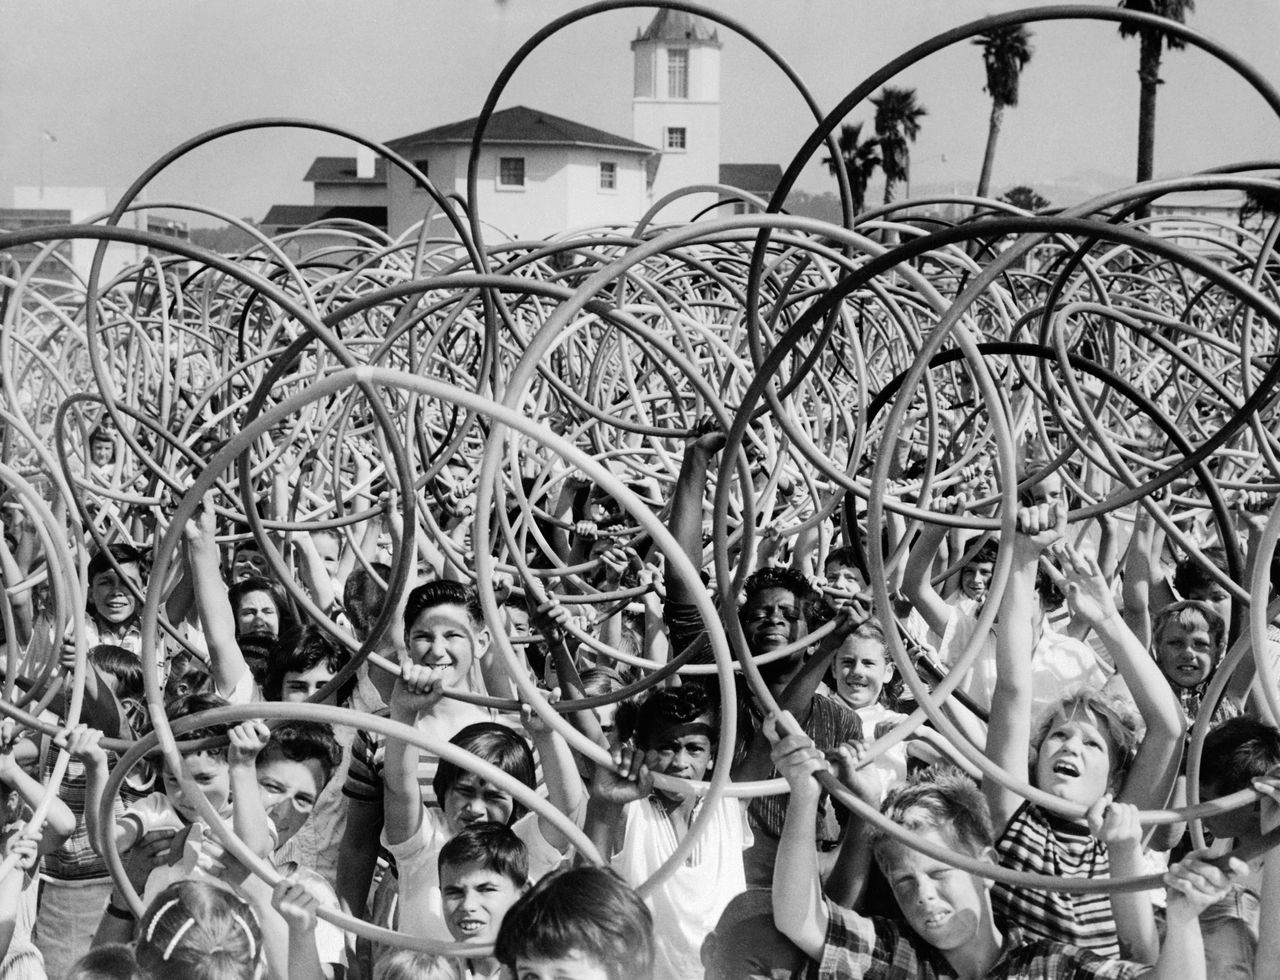 Kids hold up toy hoops in San Francisco circa 1958.